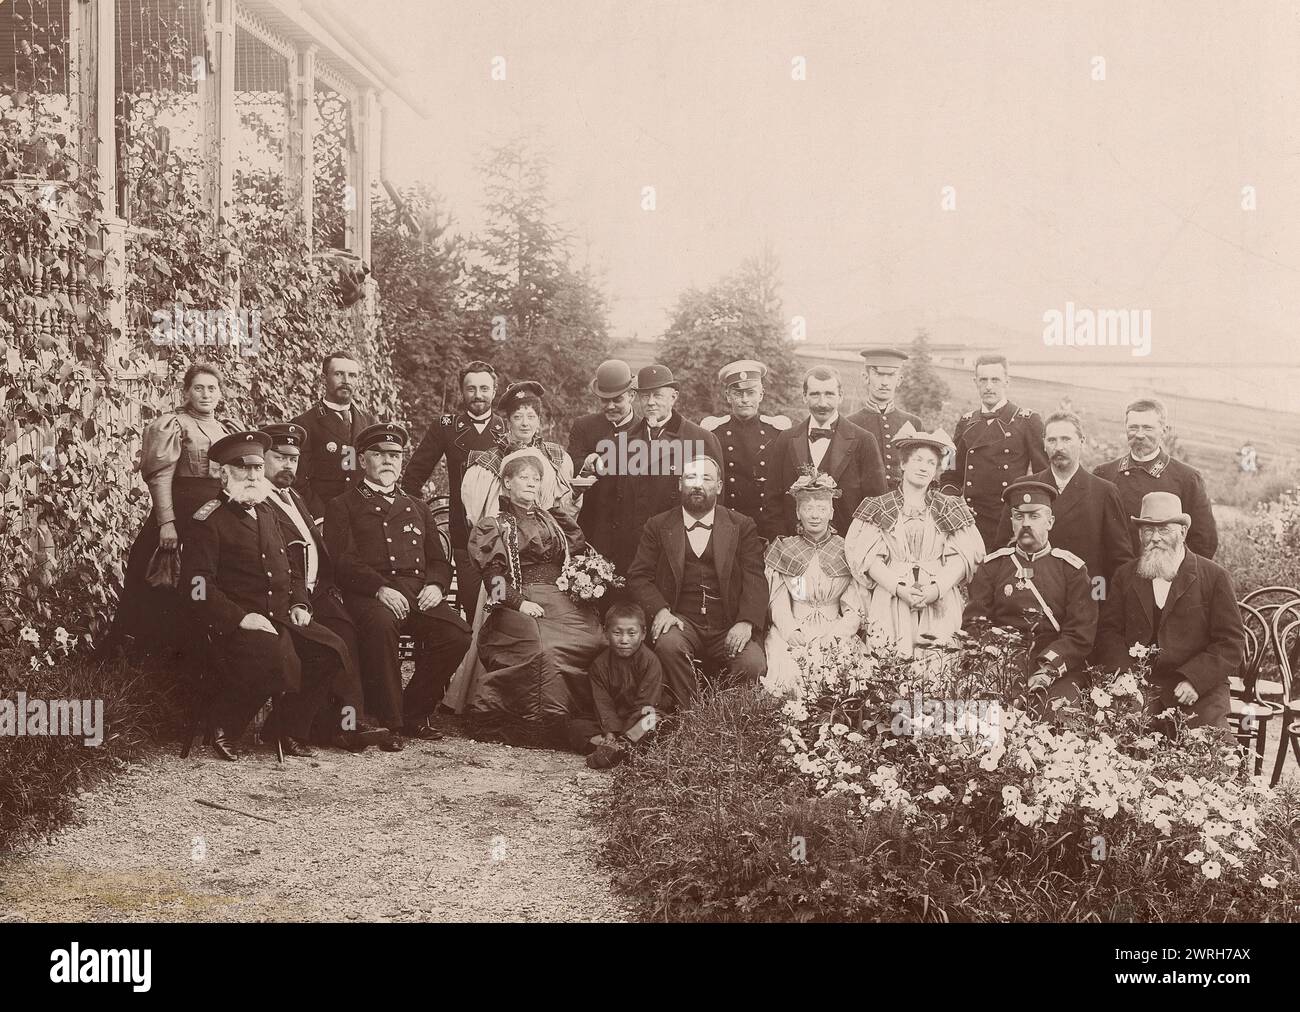 L.K. Telyakovsky - Governor-General of Yenisei province with his family and guests at a dacha in the vicinity of Krasnoyarsk, 1890. This collection includes more than four hundred photographs of daily life in Yenisei Province in the late tsarist period. Photographs include peasants, Cossacks, and high-ranking officials. Stock Photo